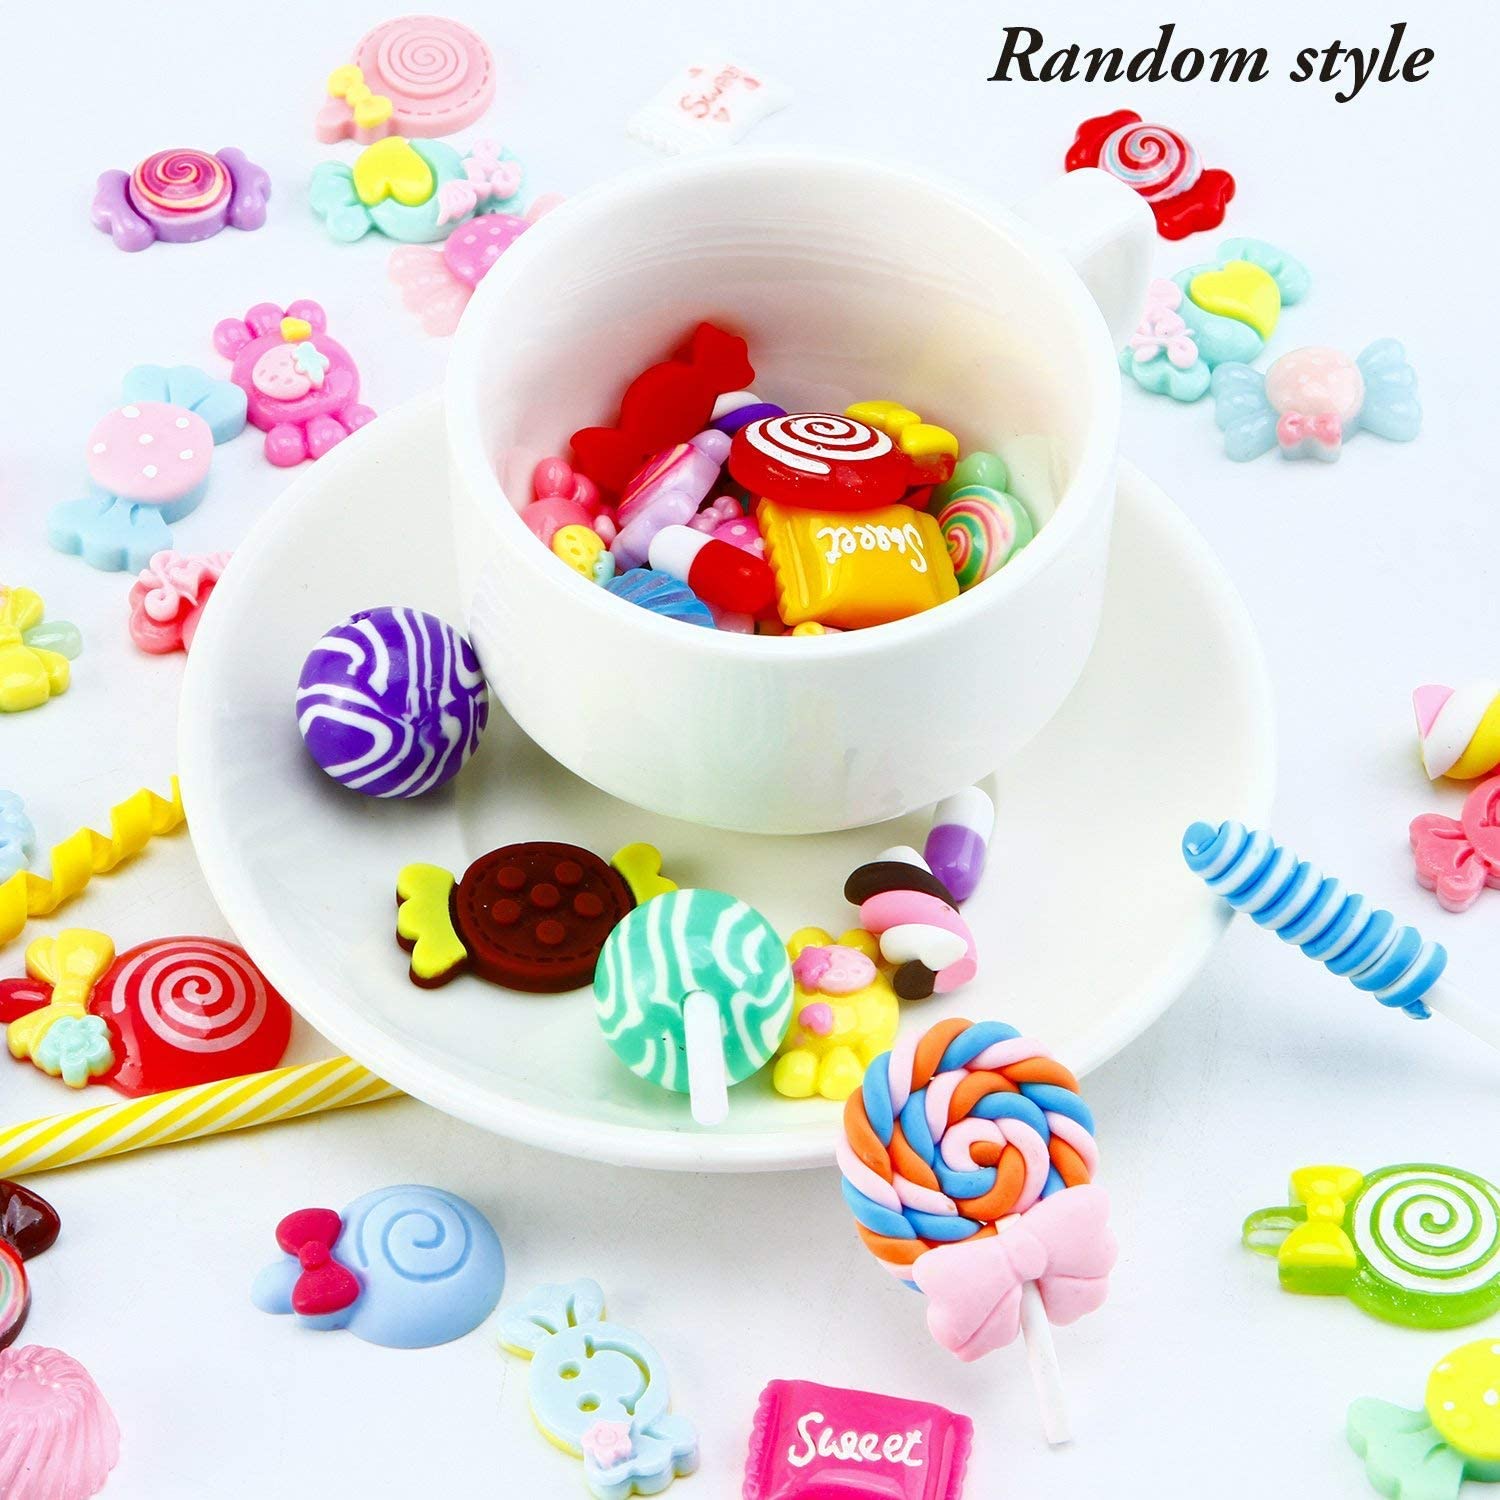 EIMELI 60 Pieces Slime Charms Set Candy Sweets Charms Mixed Flatback Resin Charms for Slime DIY Crafts Accessories Scrapbooking Slime Charms Mixed Resin Flatback Slime Beads Making Supplies - image 3 of 8